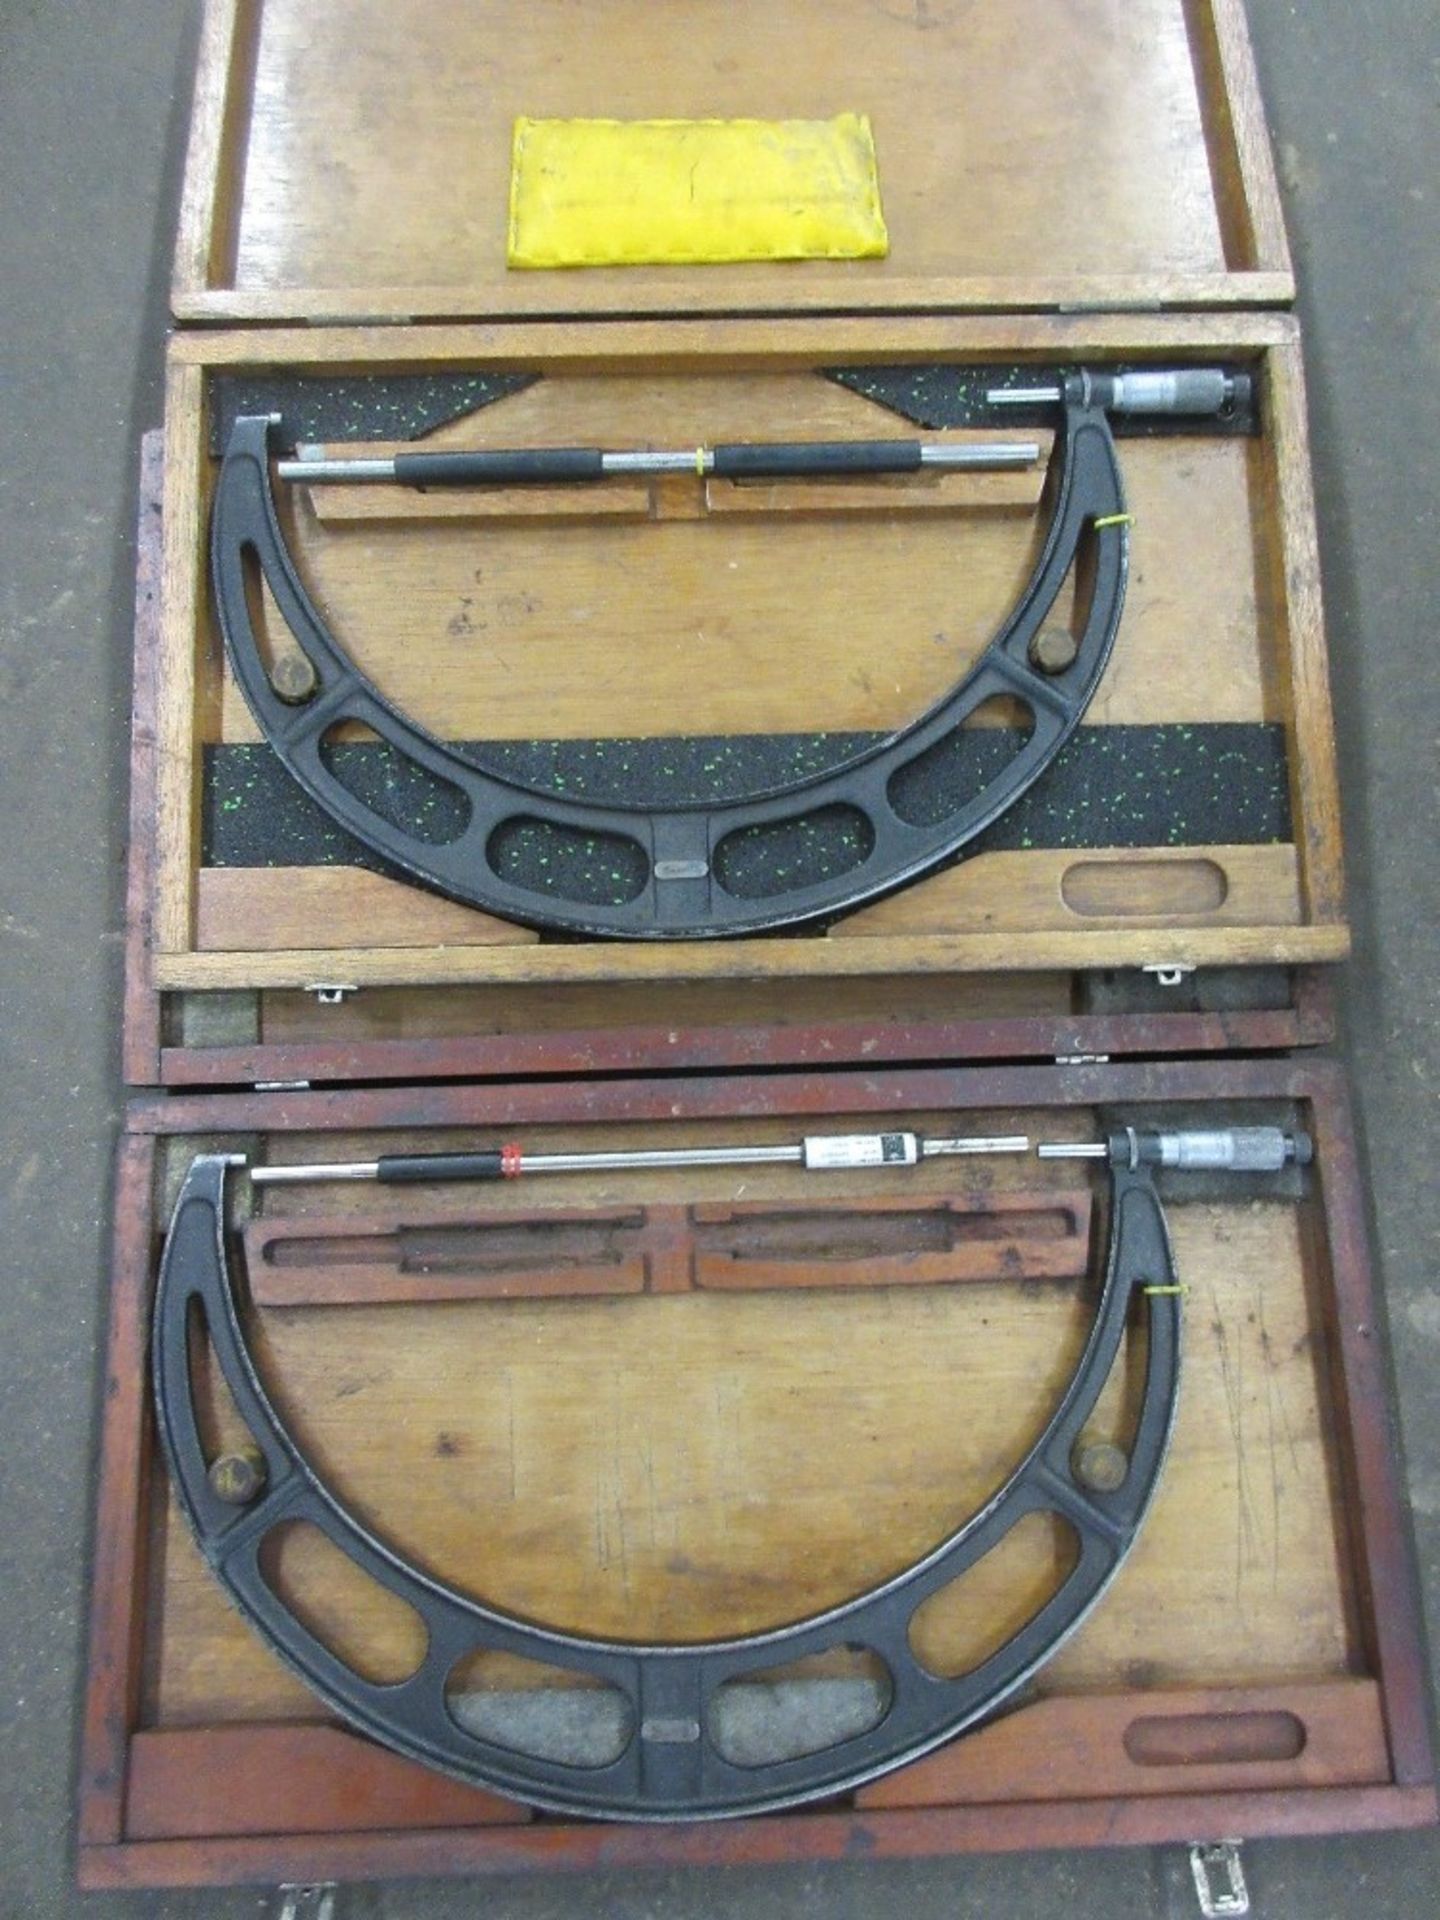 Set of 4 micrometers 250,mm - 275mm, 325mm - 350mm, 350mm - 375mm, 375mm - 400mm - Image 2 of 3